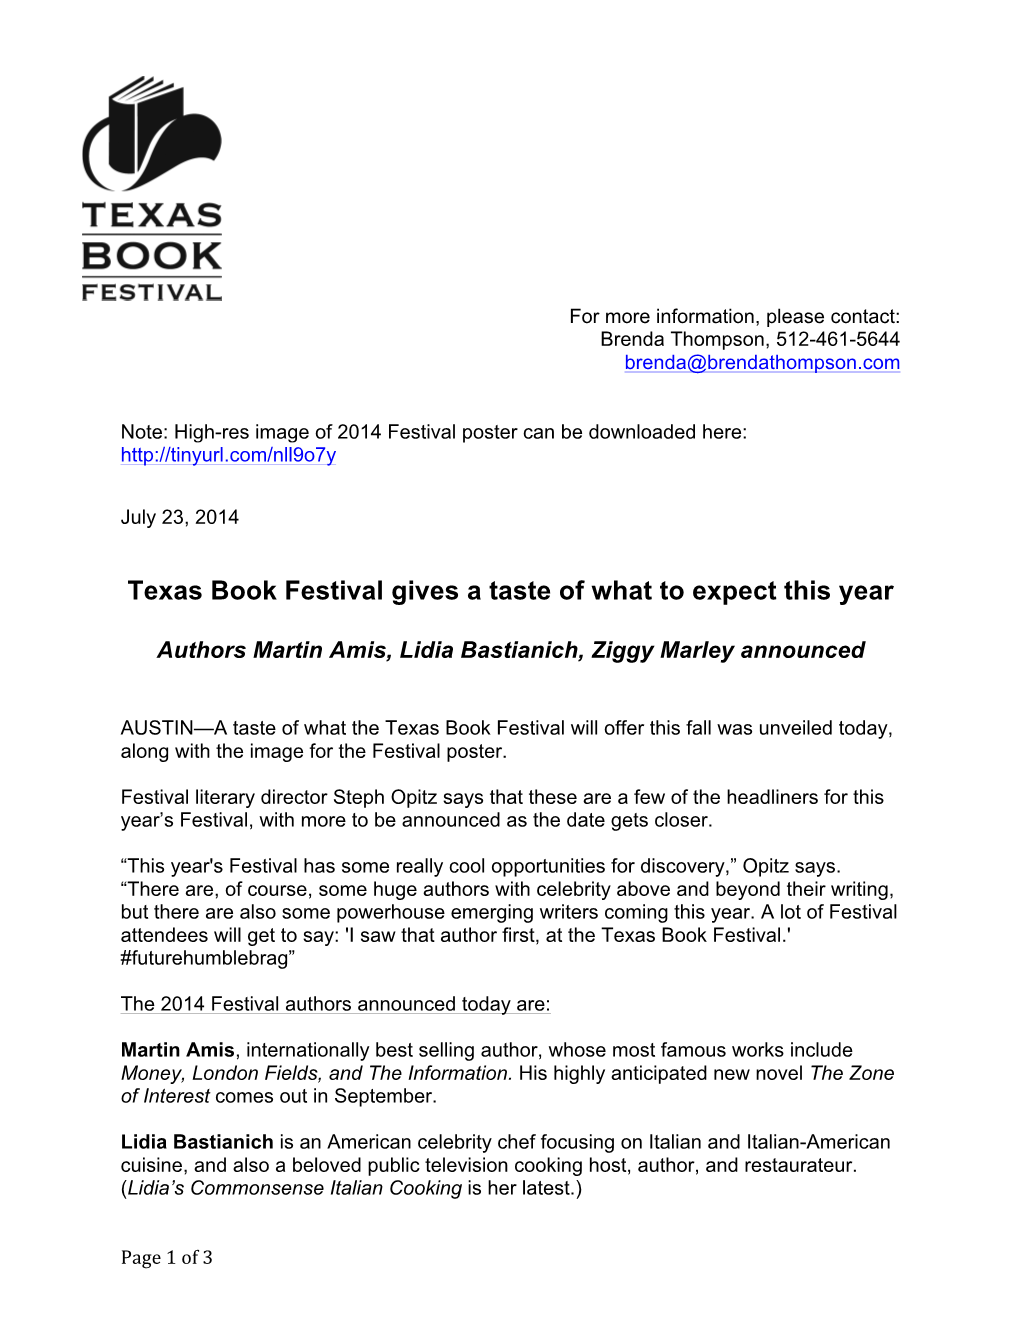 Texas Book Festival Gives a Taste of What to Expect This Year